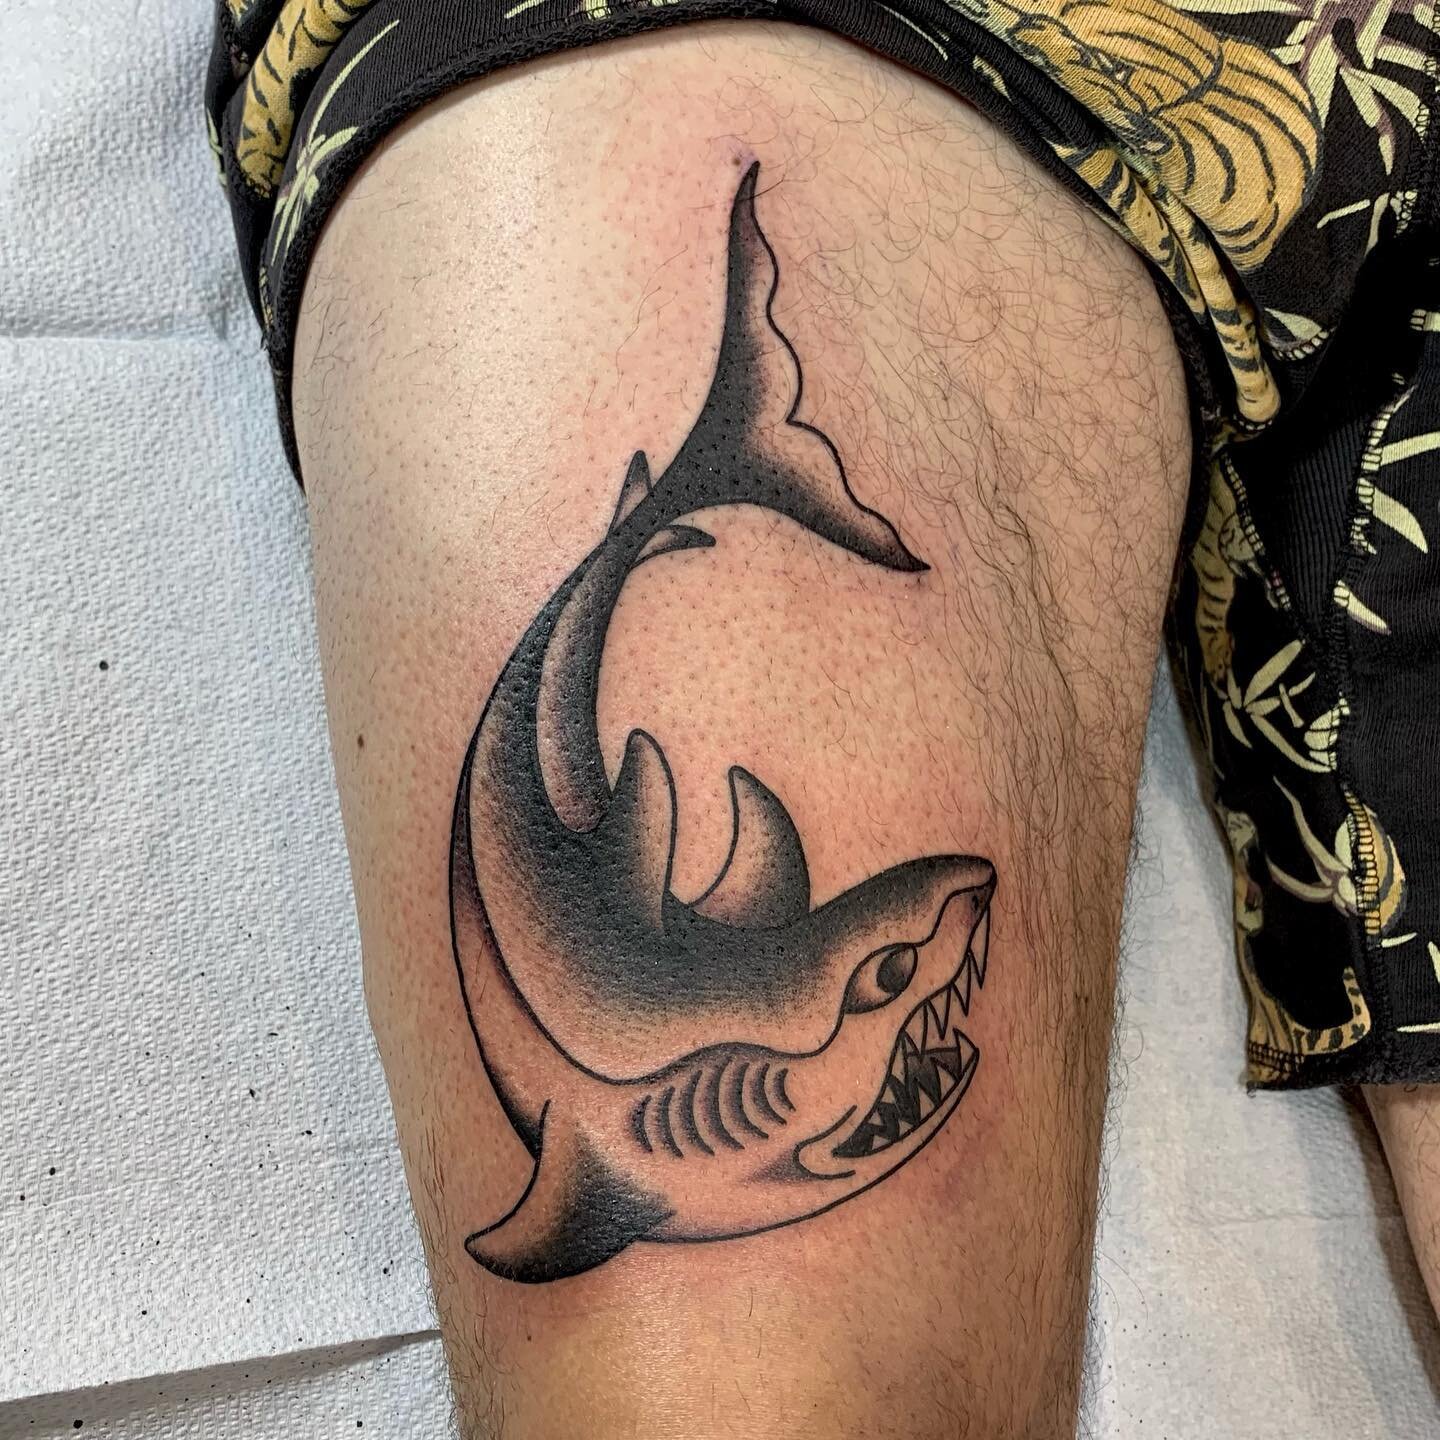 Big ol&rsquo; shark for Kris, thank you! Both fresh &amp; healed. Always booking tattoos, custom or flash. DM or email!

#shark #sharkweek #sharktattoo #vancouvertattoo #vancouver #traditionaltattoo #traditionalart #traditionaltattoos #sailorjerry #t